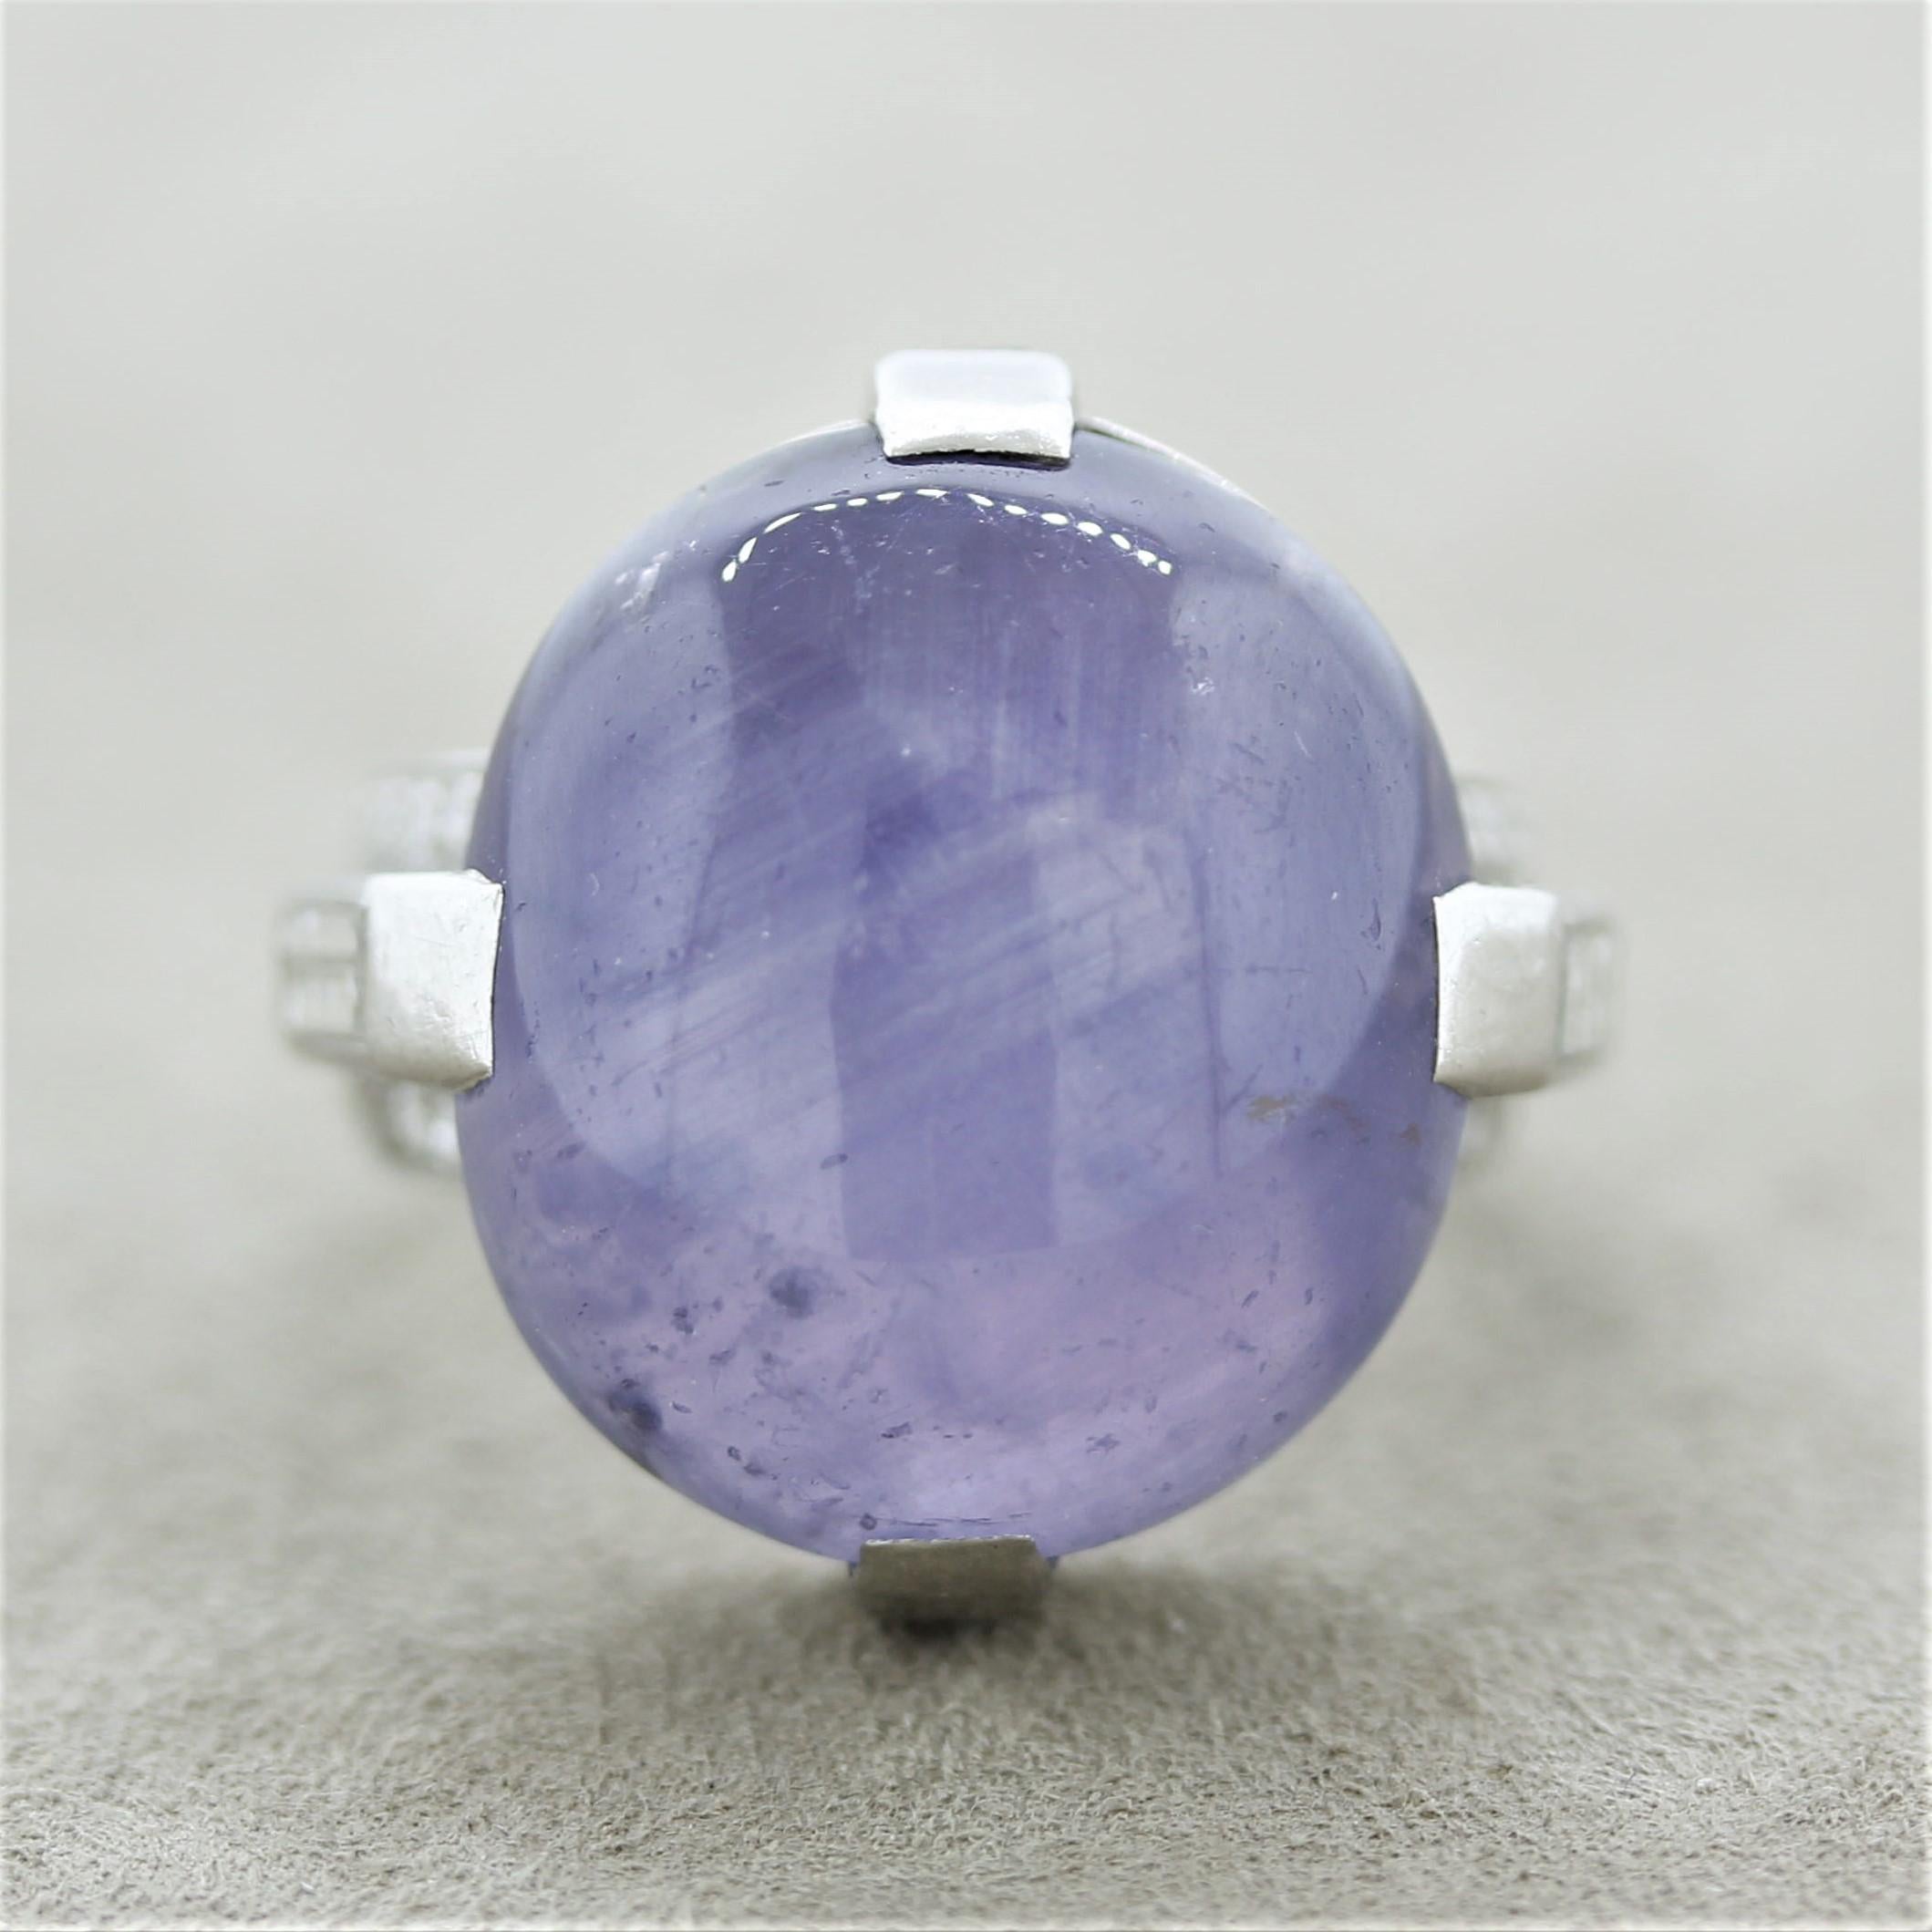 A rare Art Deco piece by Cartier made in the late 1920’s. This special piece features a large and impressive star sapphire weighing approximately 20 carats and has a unique violet-blue color and a great star (asterism) when a light hits the stone.